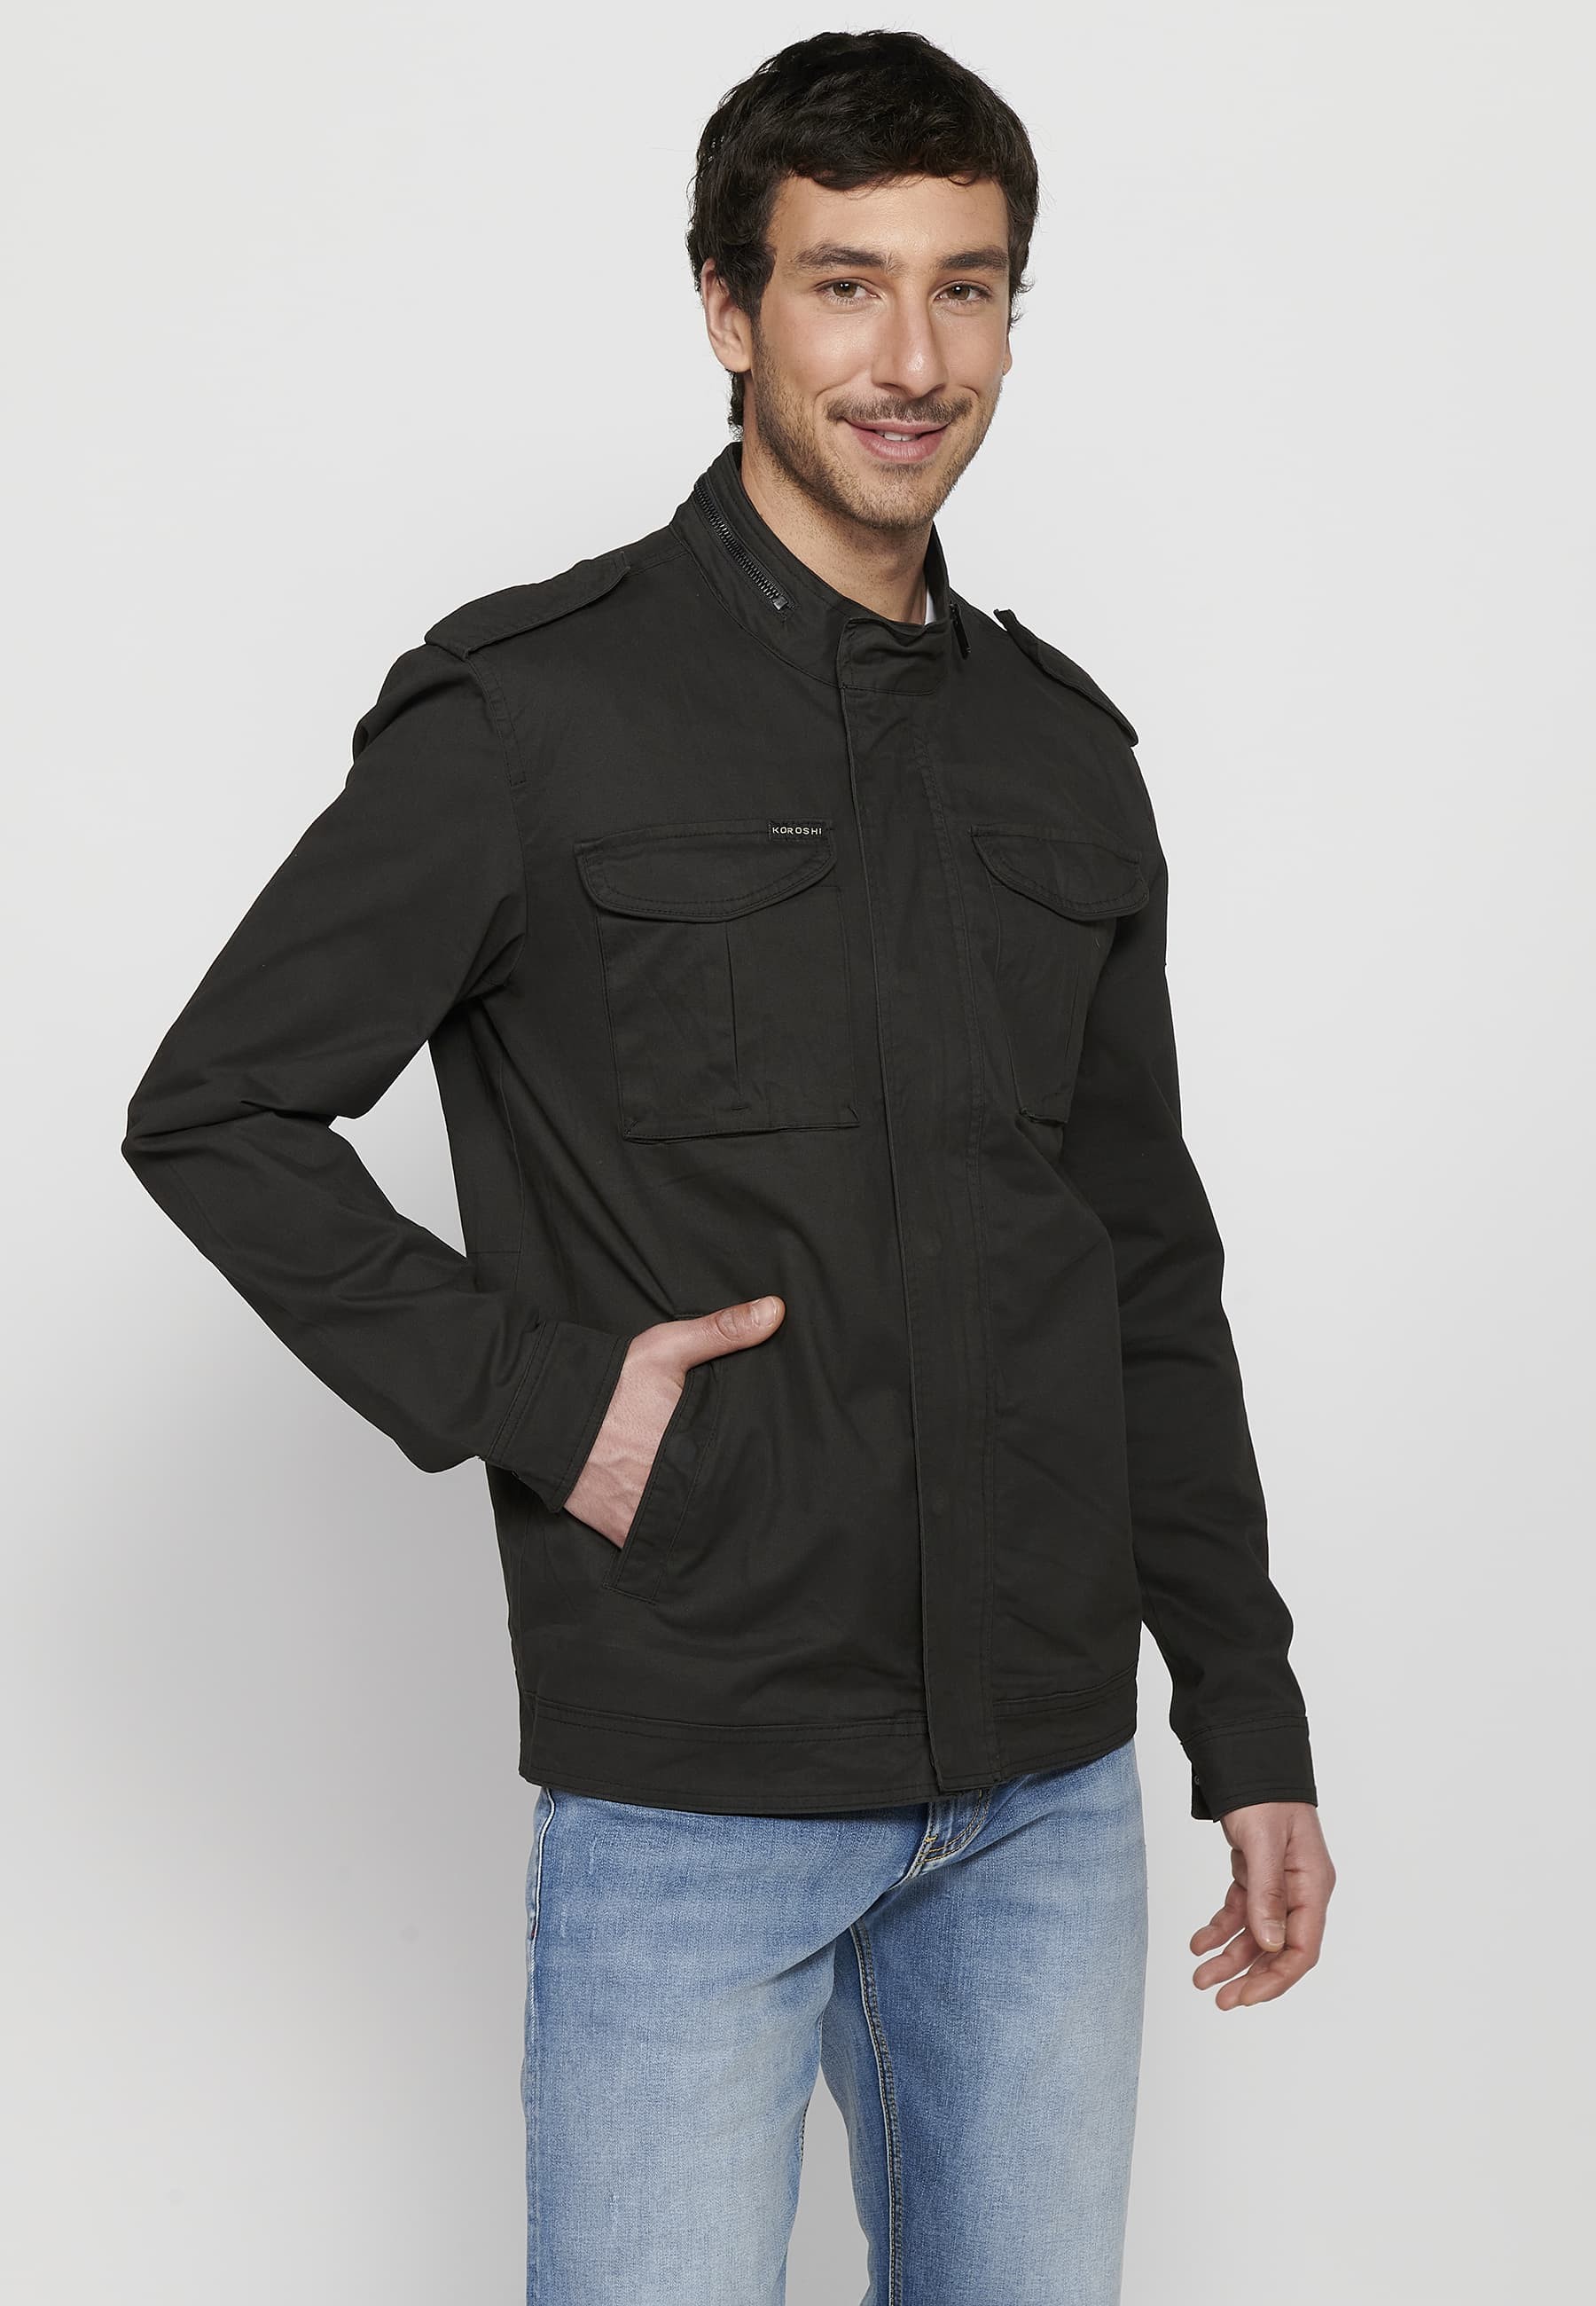 Long-sleeved jacket with high collar and front zipper closure with pockets in black for men. 4